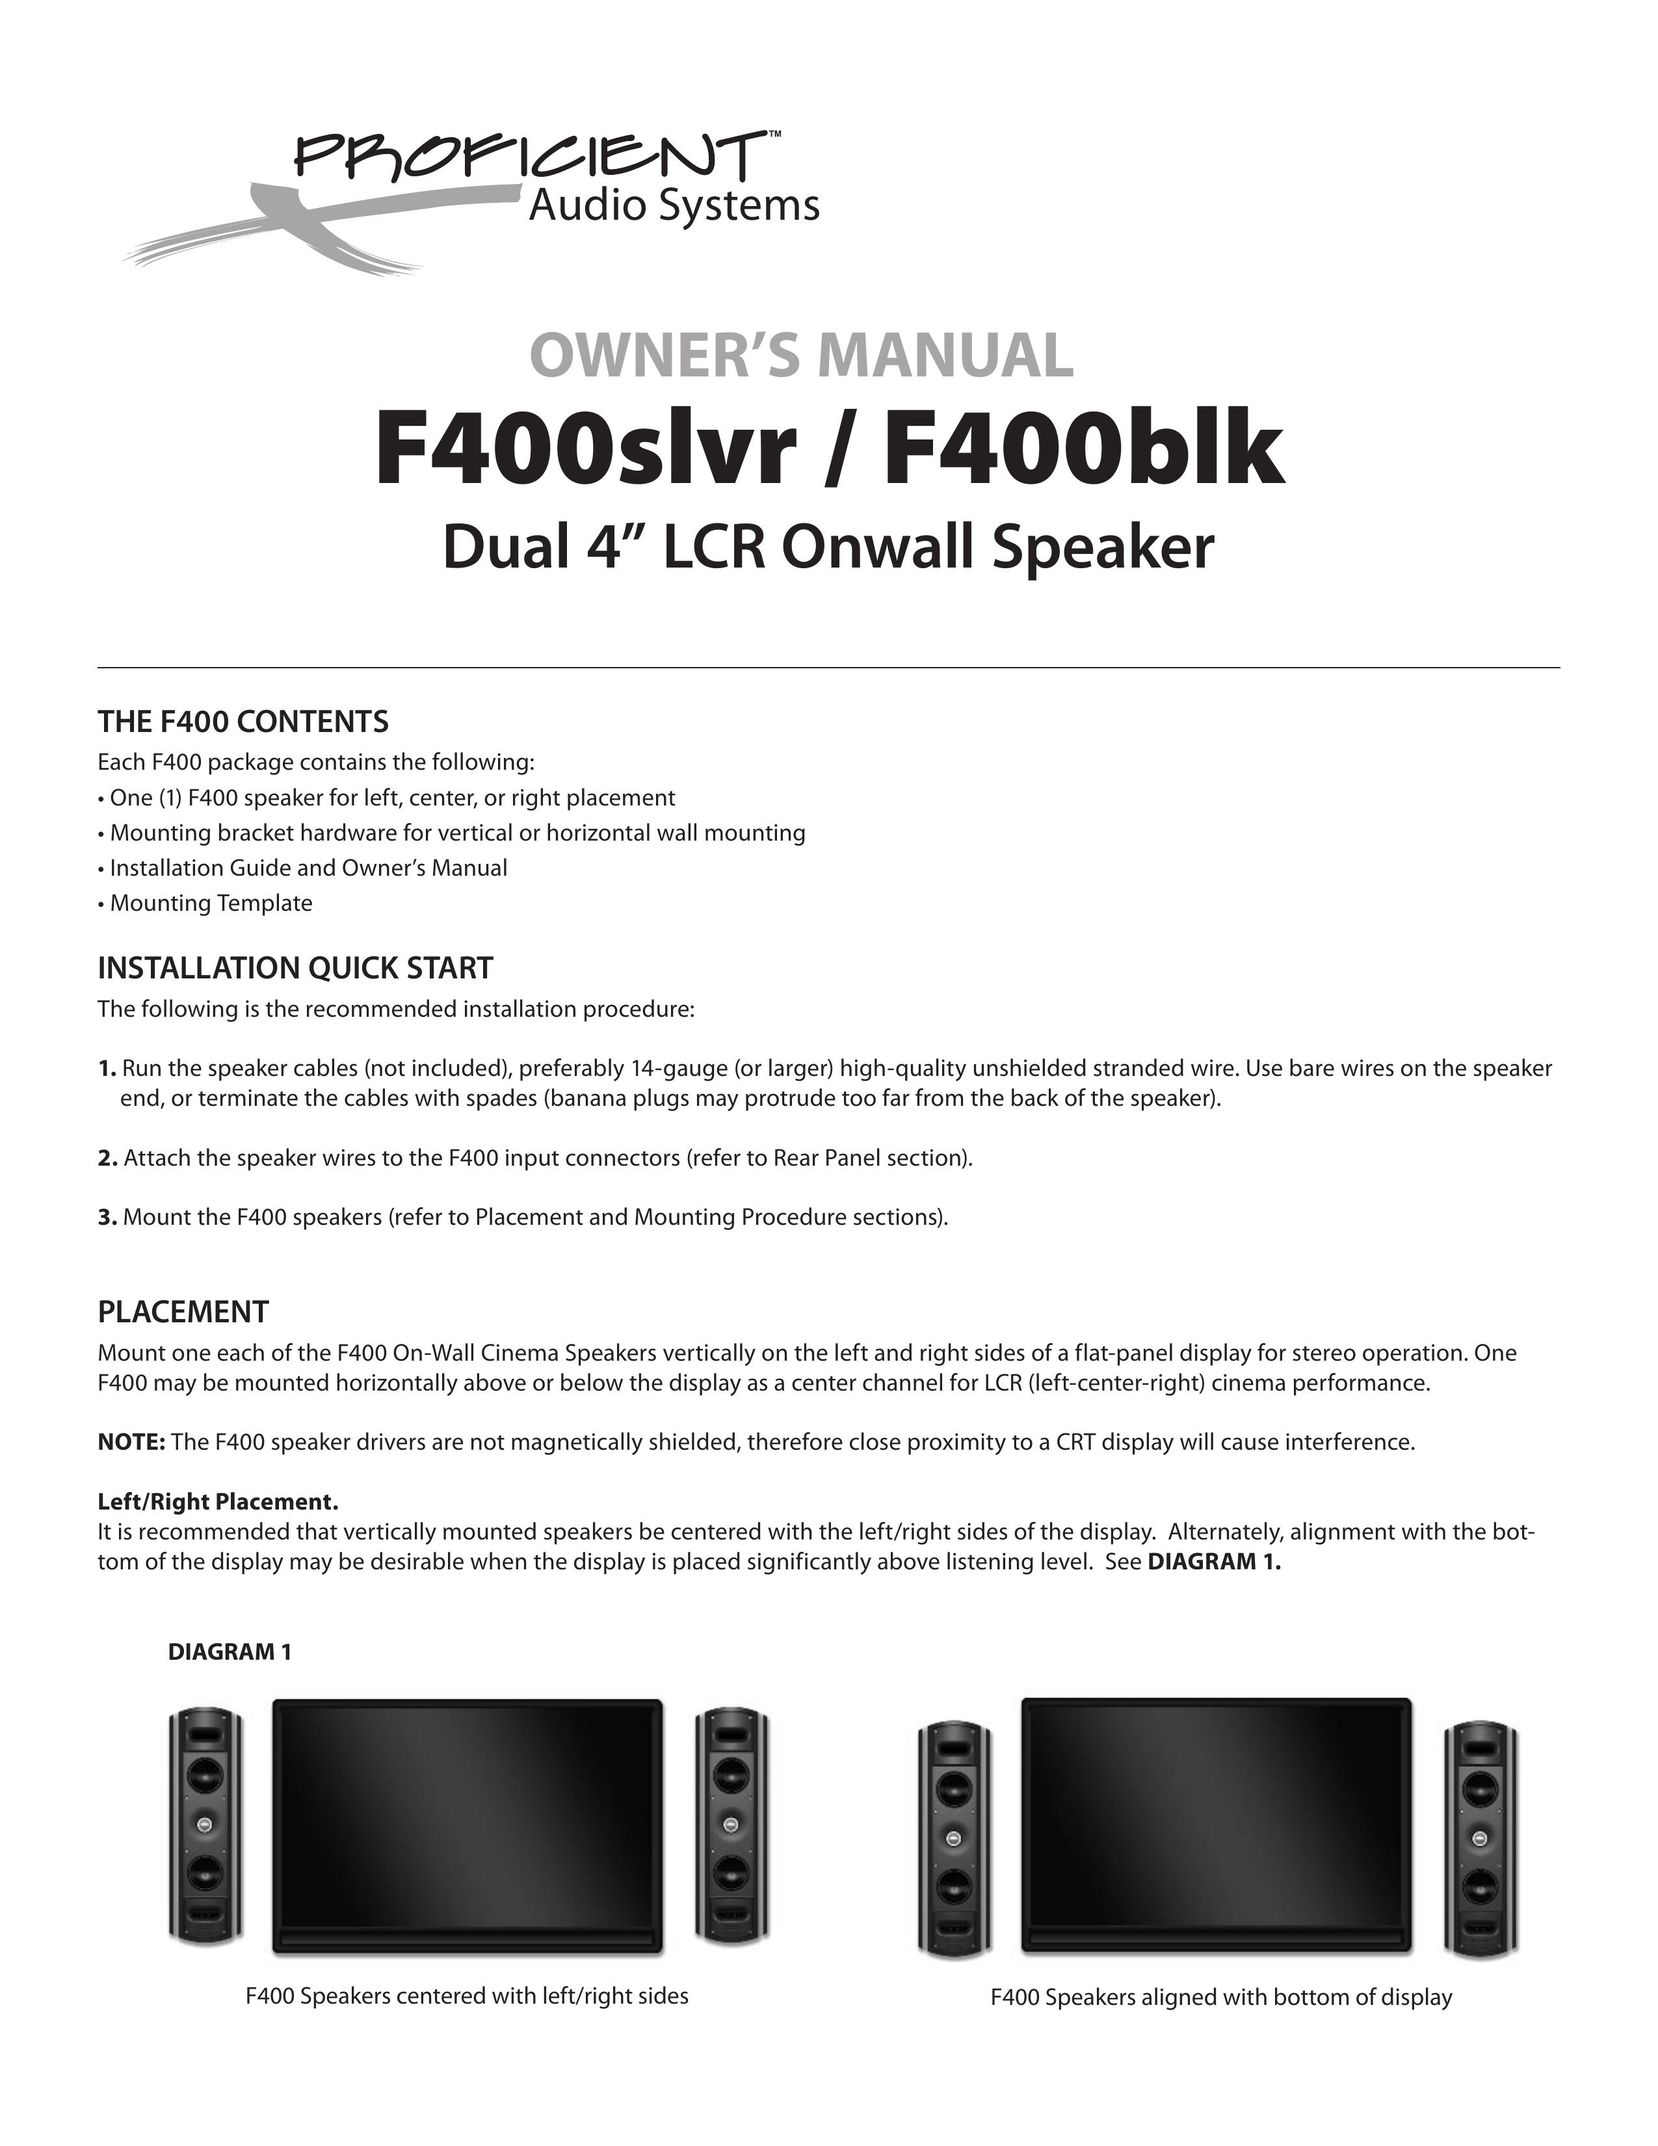 Proficient Audio Systems F400SLVR Home Theater System User Manual